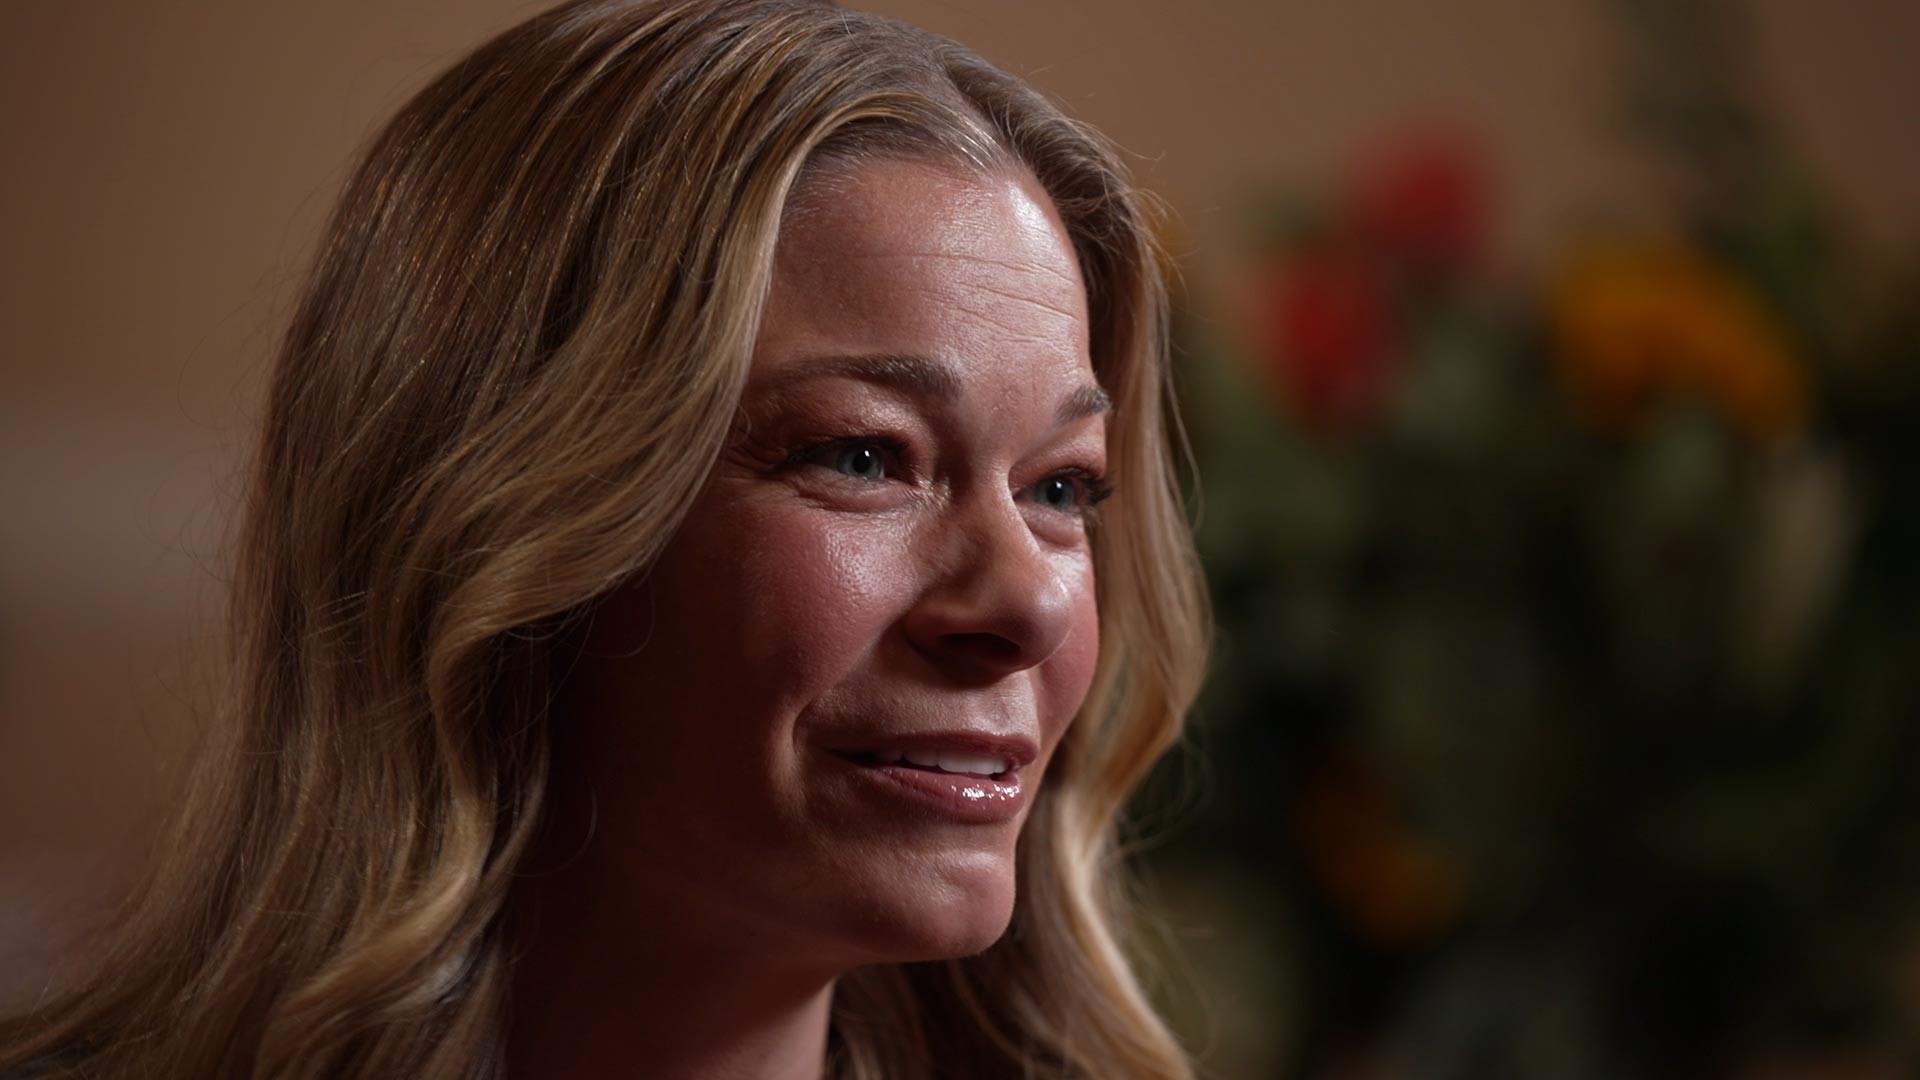 LeAnn Rimes became a national music star when she was just 13 years old. Now, she looks back at how far she's come.